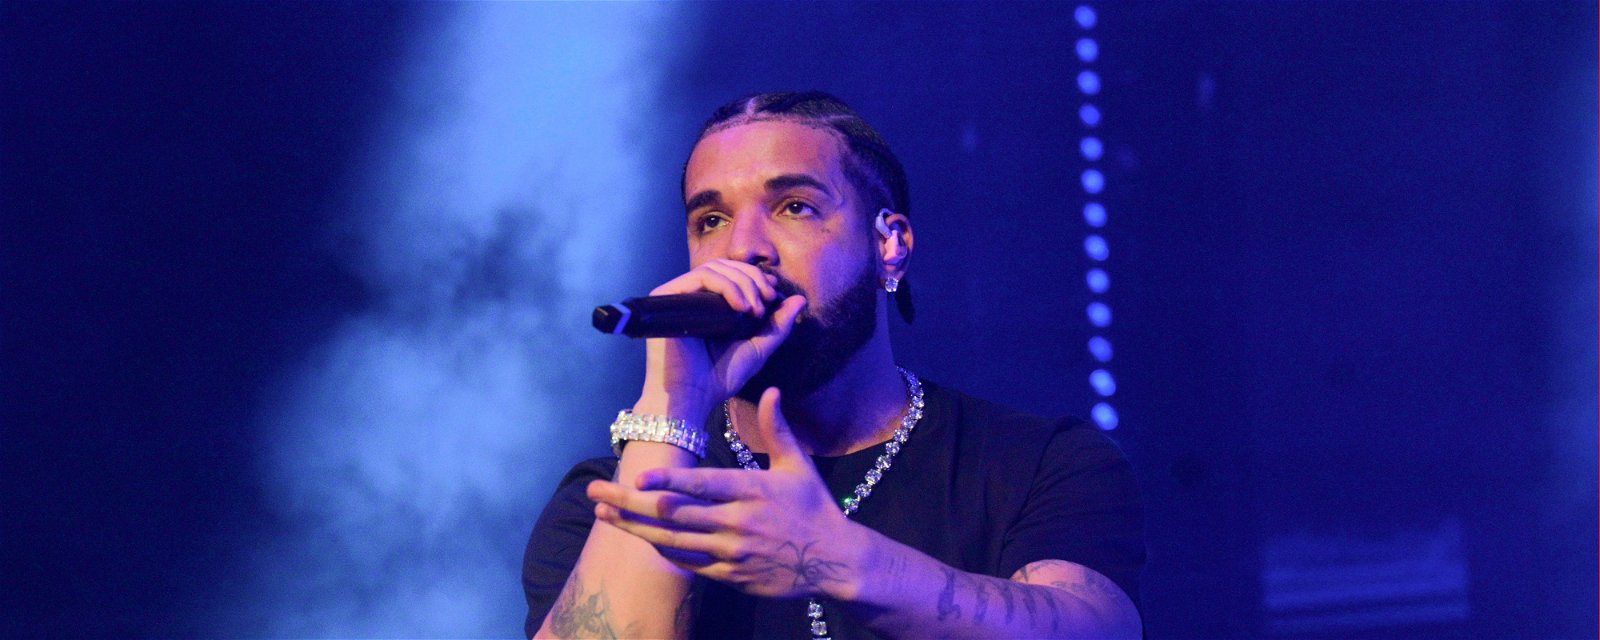 Drake and his amigos head to Houston as part of North American